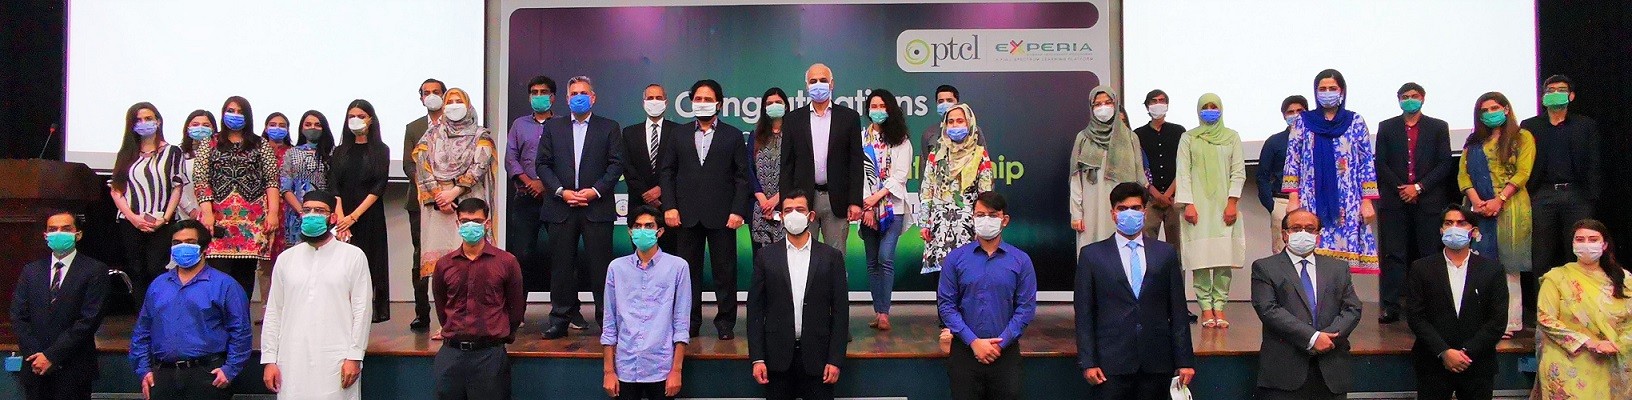 PTCL internship program Experia 2020 - Pakistan Telecommunication Company Limited (PTCL) successfully concluded its flagship internship program Experia 2020 with a closing ceremony held at the PTCL HQ in Islamabad. Despite the ongoing pandemic, the company engaged with the students virtually and provided them with ample learning opportunities and mentorship. For this flagship program, 25 students from well-renowned universities such as LUMS, IBA Karachi, NUST, FAST and Bahria University were selected out of 1200 students through online Gamified Assessment. On the occasion, Syed Mazhar Hussain, Group Chief Human Resource Officer, PTCL & Ufone, said, “Our commitment to the youth of Pakistan remains strong as we create ample opportunities of learning and mentoring. Experia is one of the flagship internship program at PTCL, where we nurture and groom the best talent from various universities in Pakistan. We made efforts to ensure that this program continues in its true spirit even in COVID-19 by adding virtual mechanism in place.” Selected students were given an online orientation of a detailed six-week plan and were assigned to their respective projects and departments. As part of Experia’s holistic learning, the interns were provided access to PTCL’s internal Learning Management System known as ‘LearnX’ along with a recommended in-house built program ‘Developing Managerial Skills’. They were also given exclusive access to world renowned Digital Learning Platform ‘LinkedIn Learning,’ which they will continue to access and learn from even after their internship. In a fun and innovative way, the interns were given an opportunity to learn about PTCL’s culture, Code of Conduct, CSR initiatives and its Corporate Values. They were also given virtual tours of the Network Operations Center, Telephone Exchange, Smart Shop and Data Centers. The final presentations took place online with the top three students presenting their projects during the closing ceremony. The students were also taken on a field trip to PTCL Satellite Earth Station, located on the outskirts of Islamabad known as ‘Malaach Earth Station’. PTCL is committed to develop young talent of Pakistan by providing learning and growth opportunities to build confidence, skills and pride for their bright future.